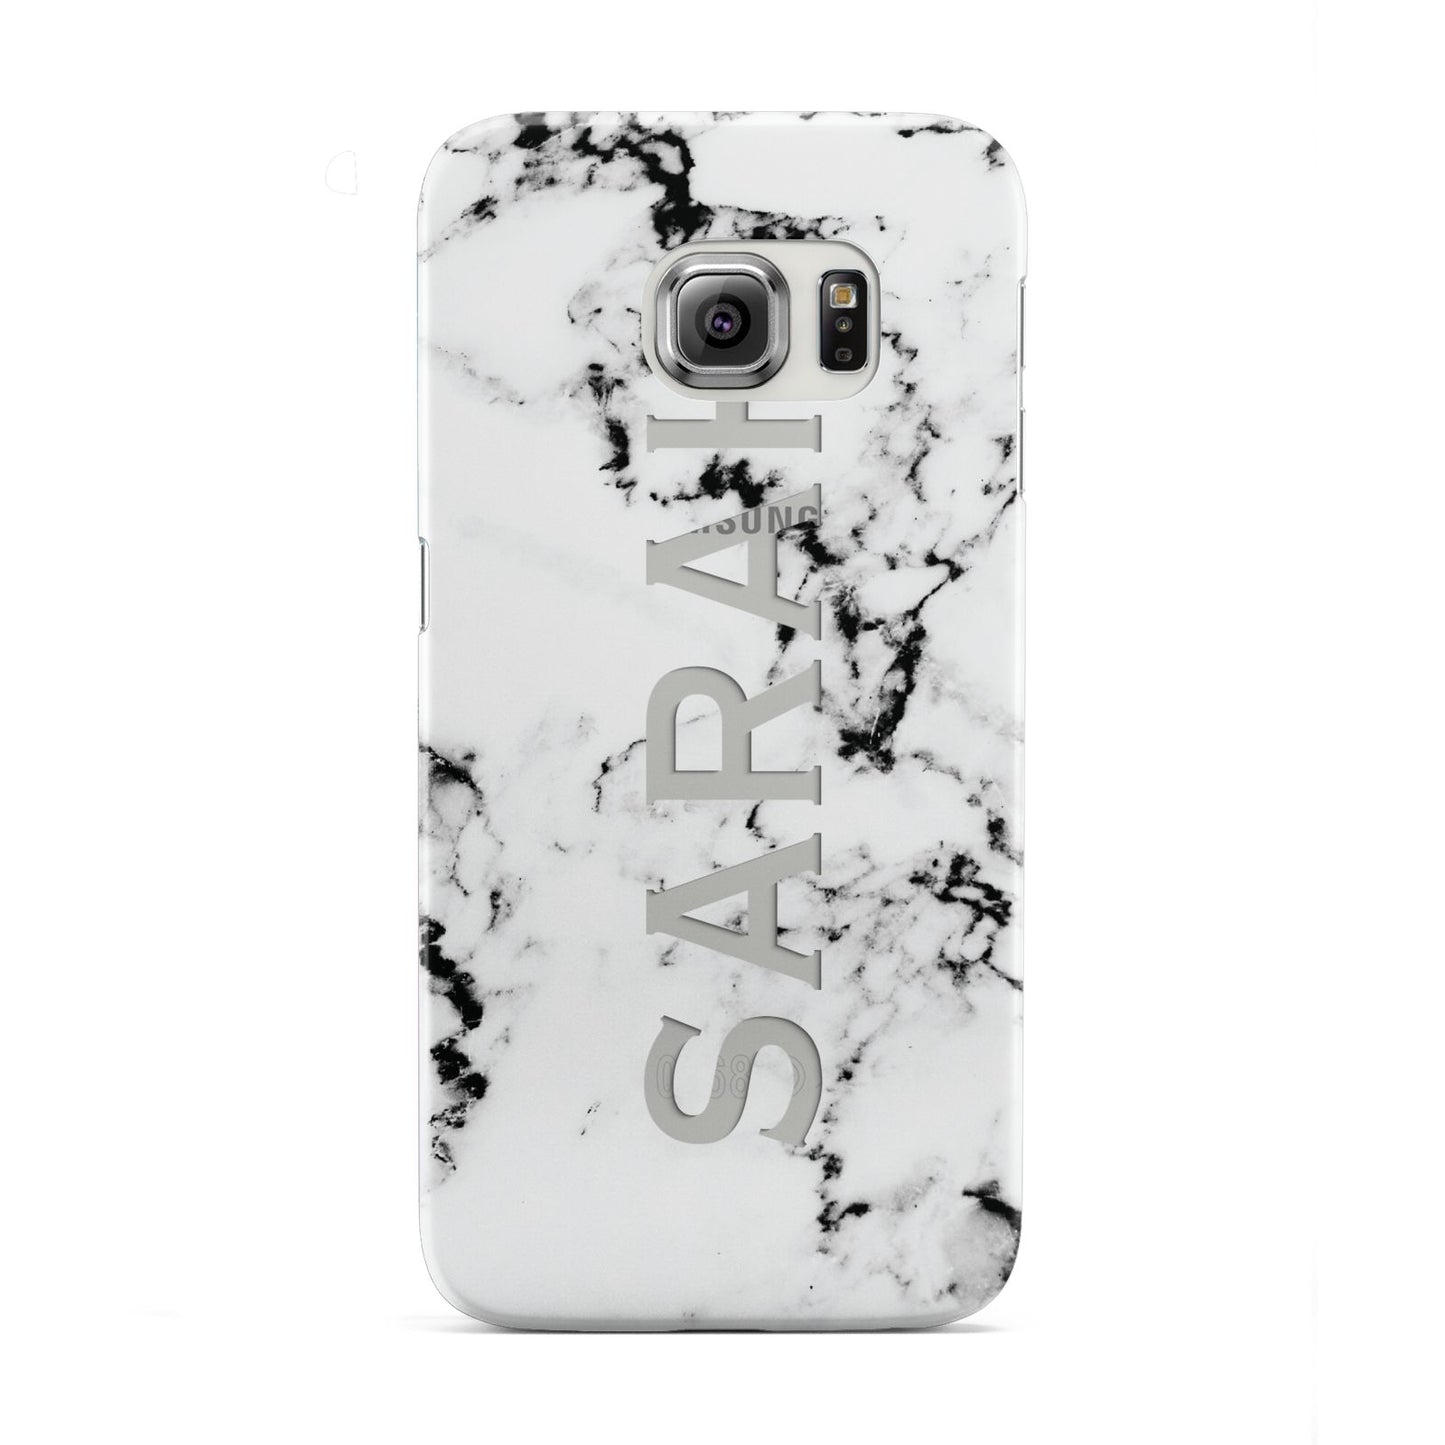 Personalised Clear Name Black White Marble Custom Samsung Galaxy S6 Edge Case